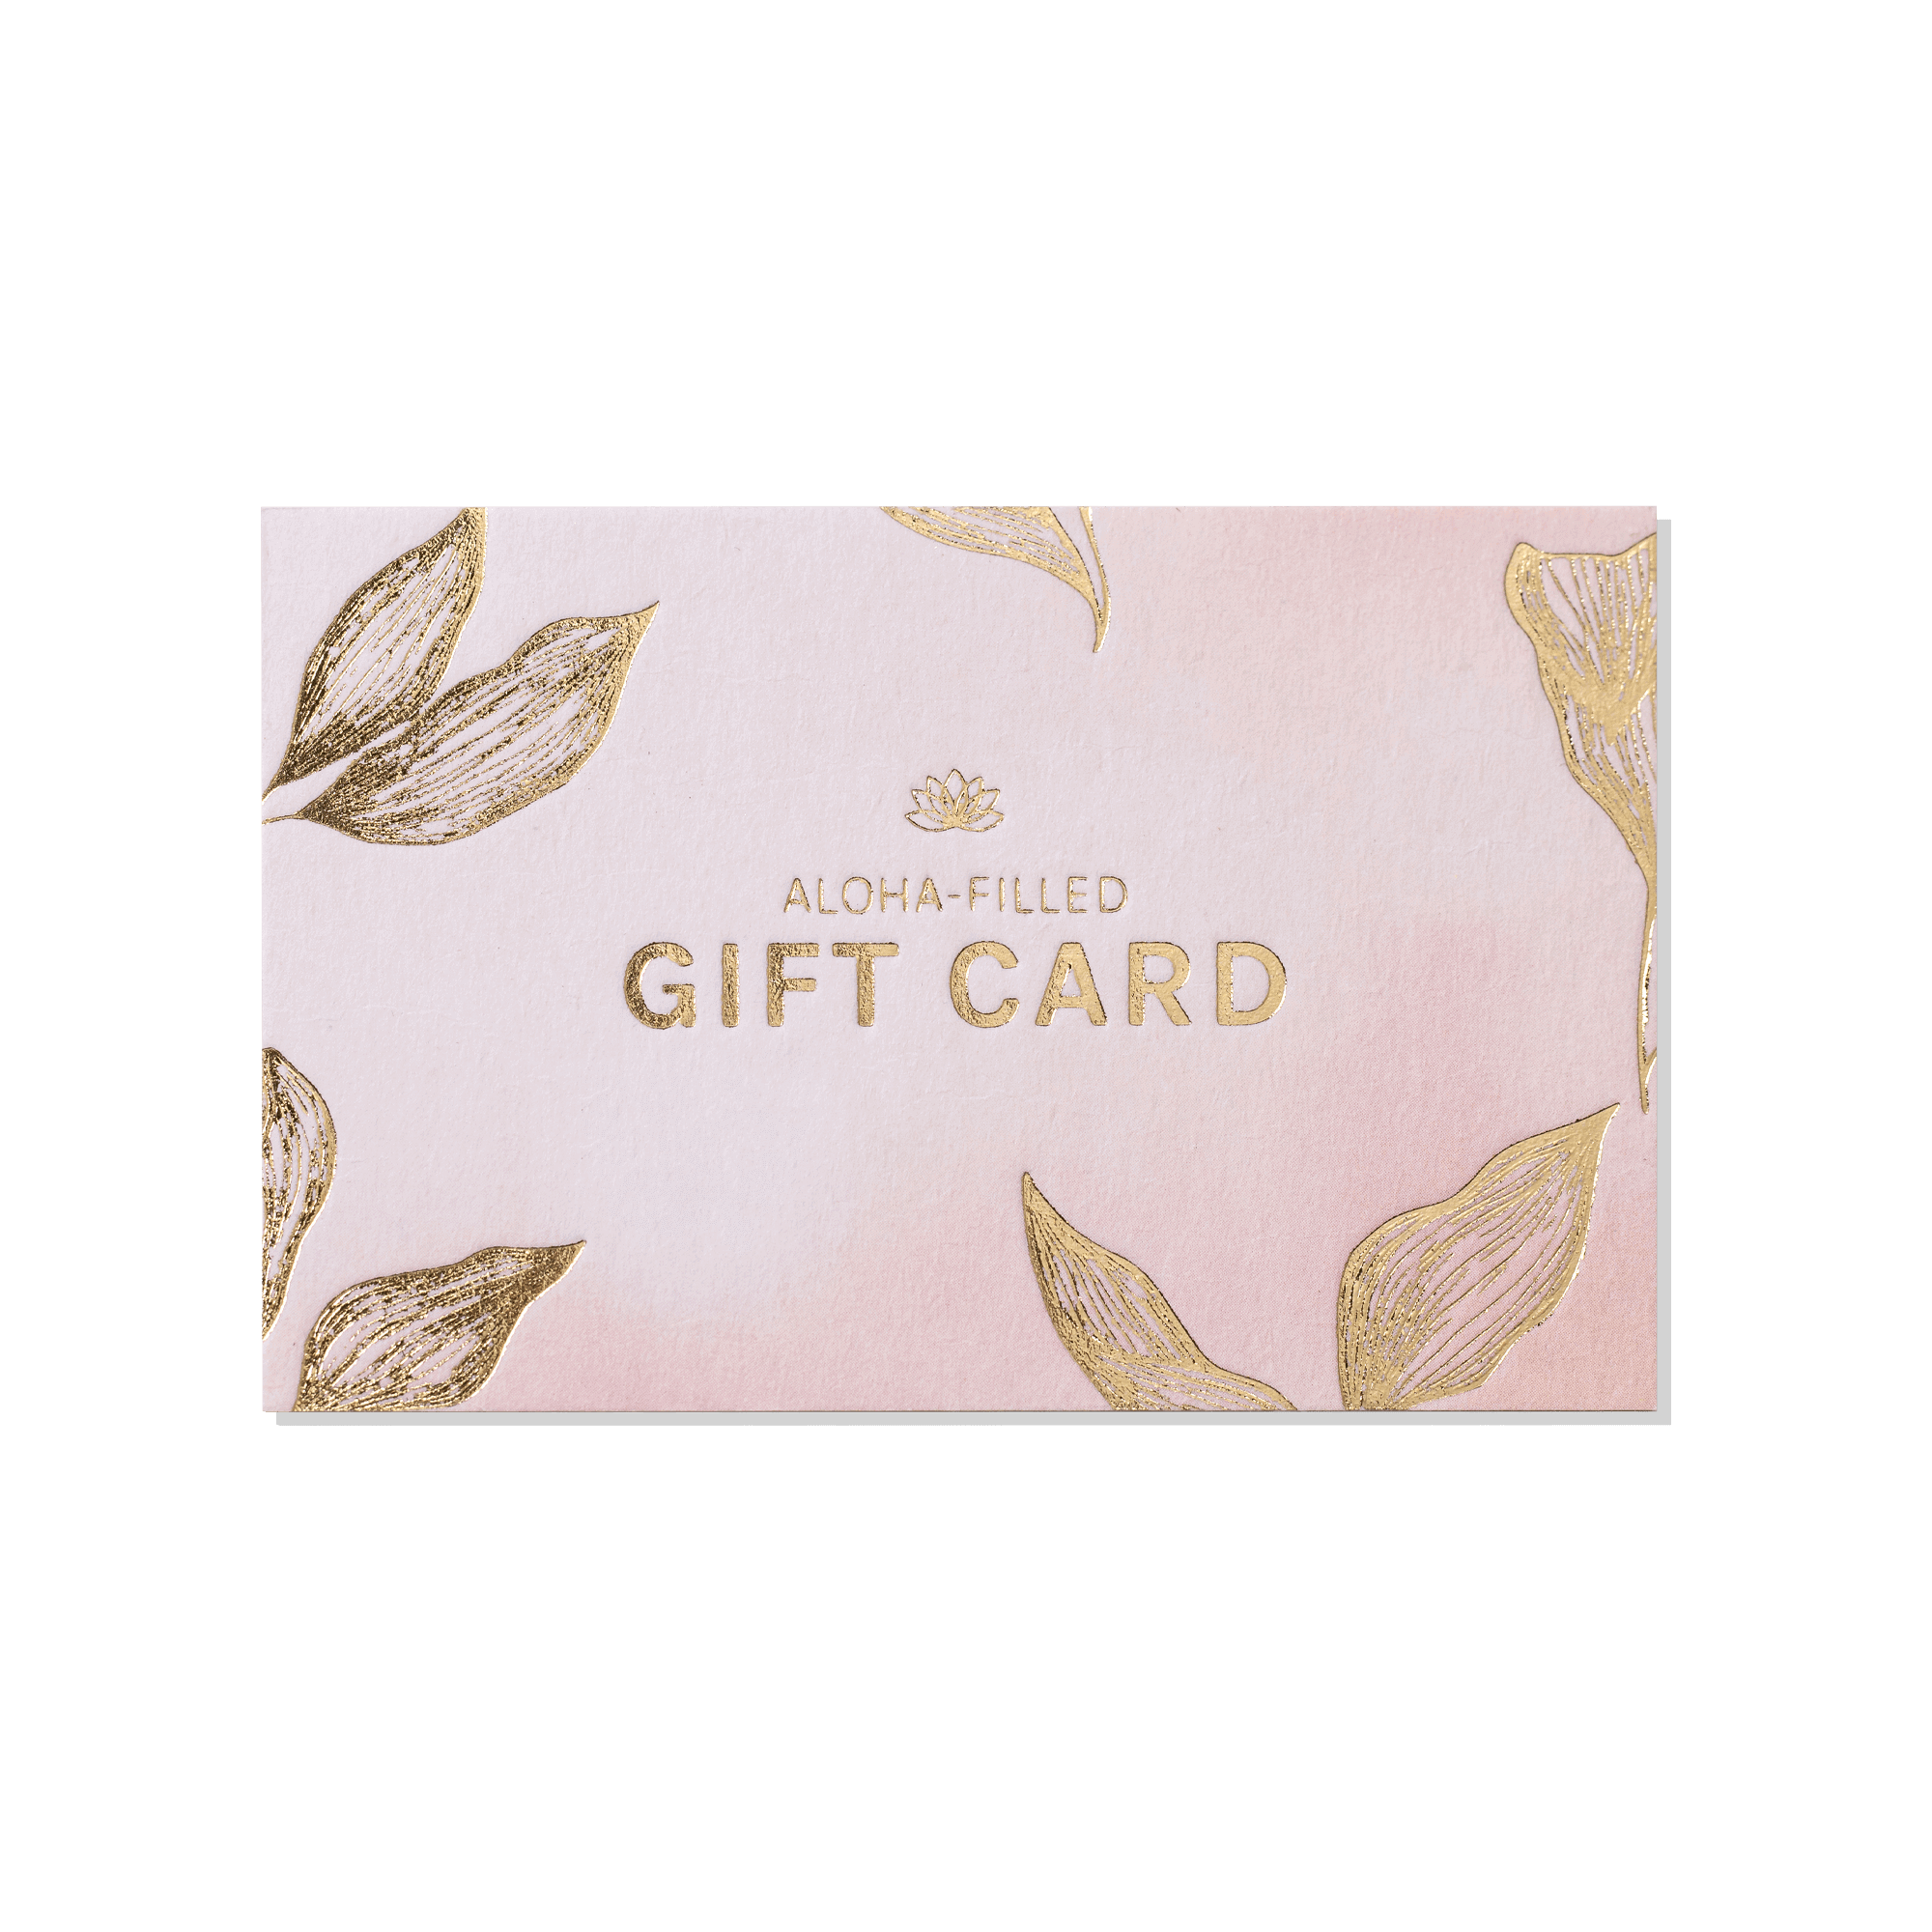 Gift Card in Gift Box